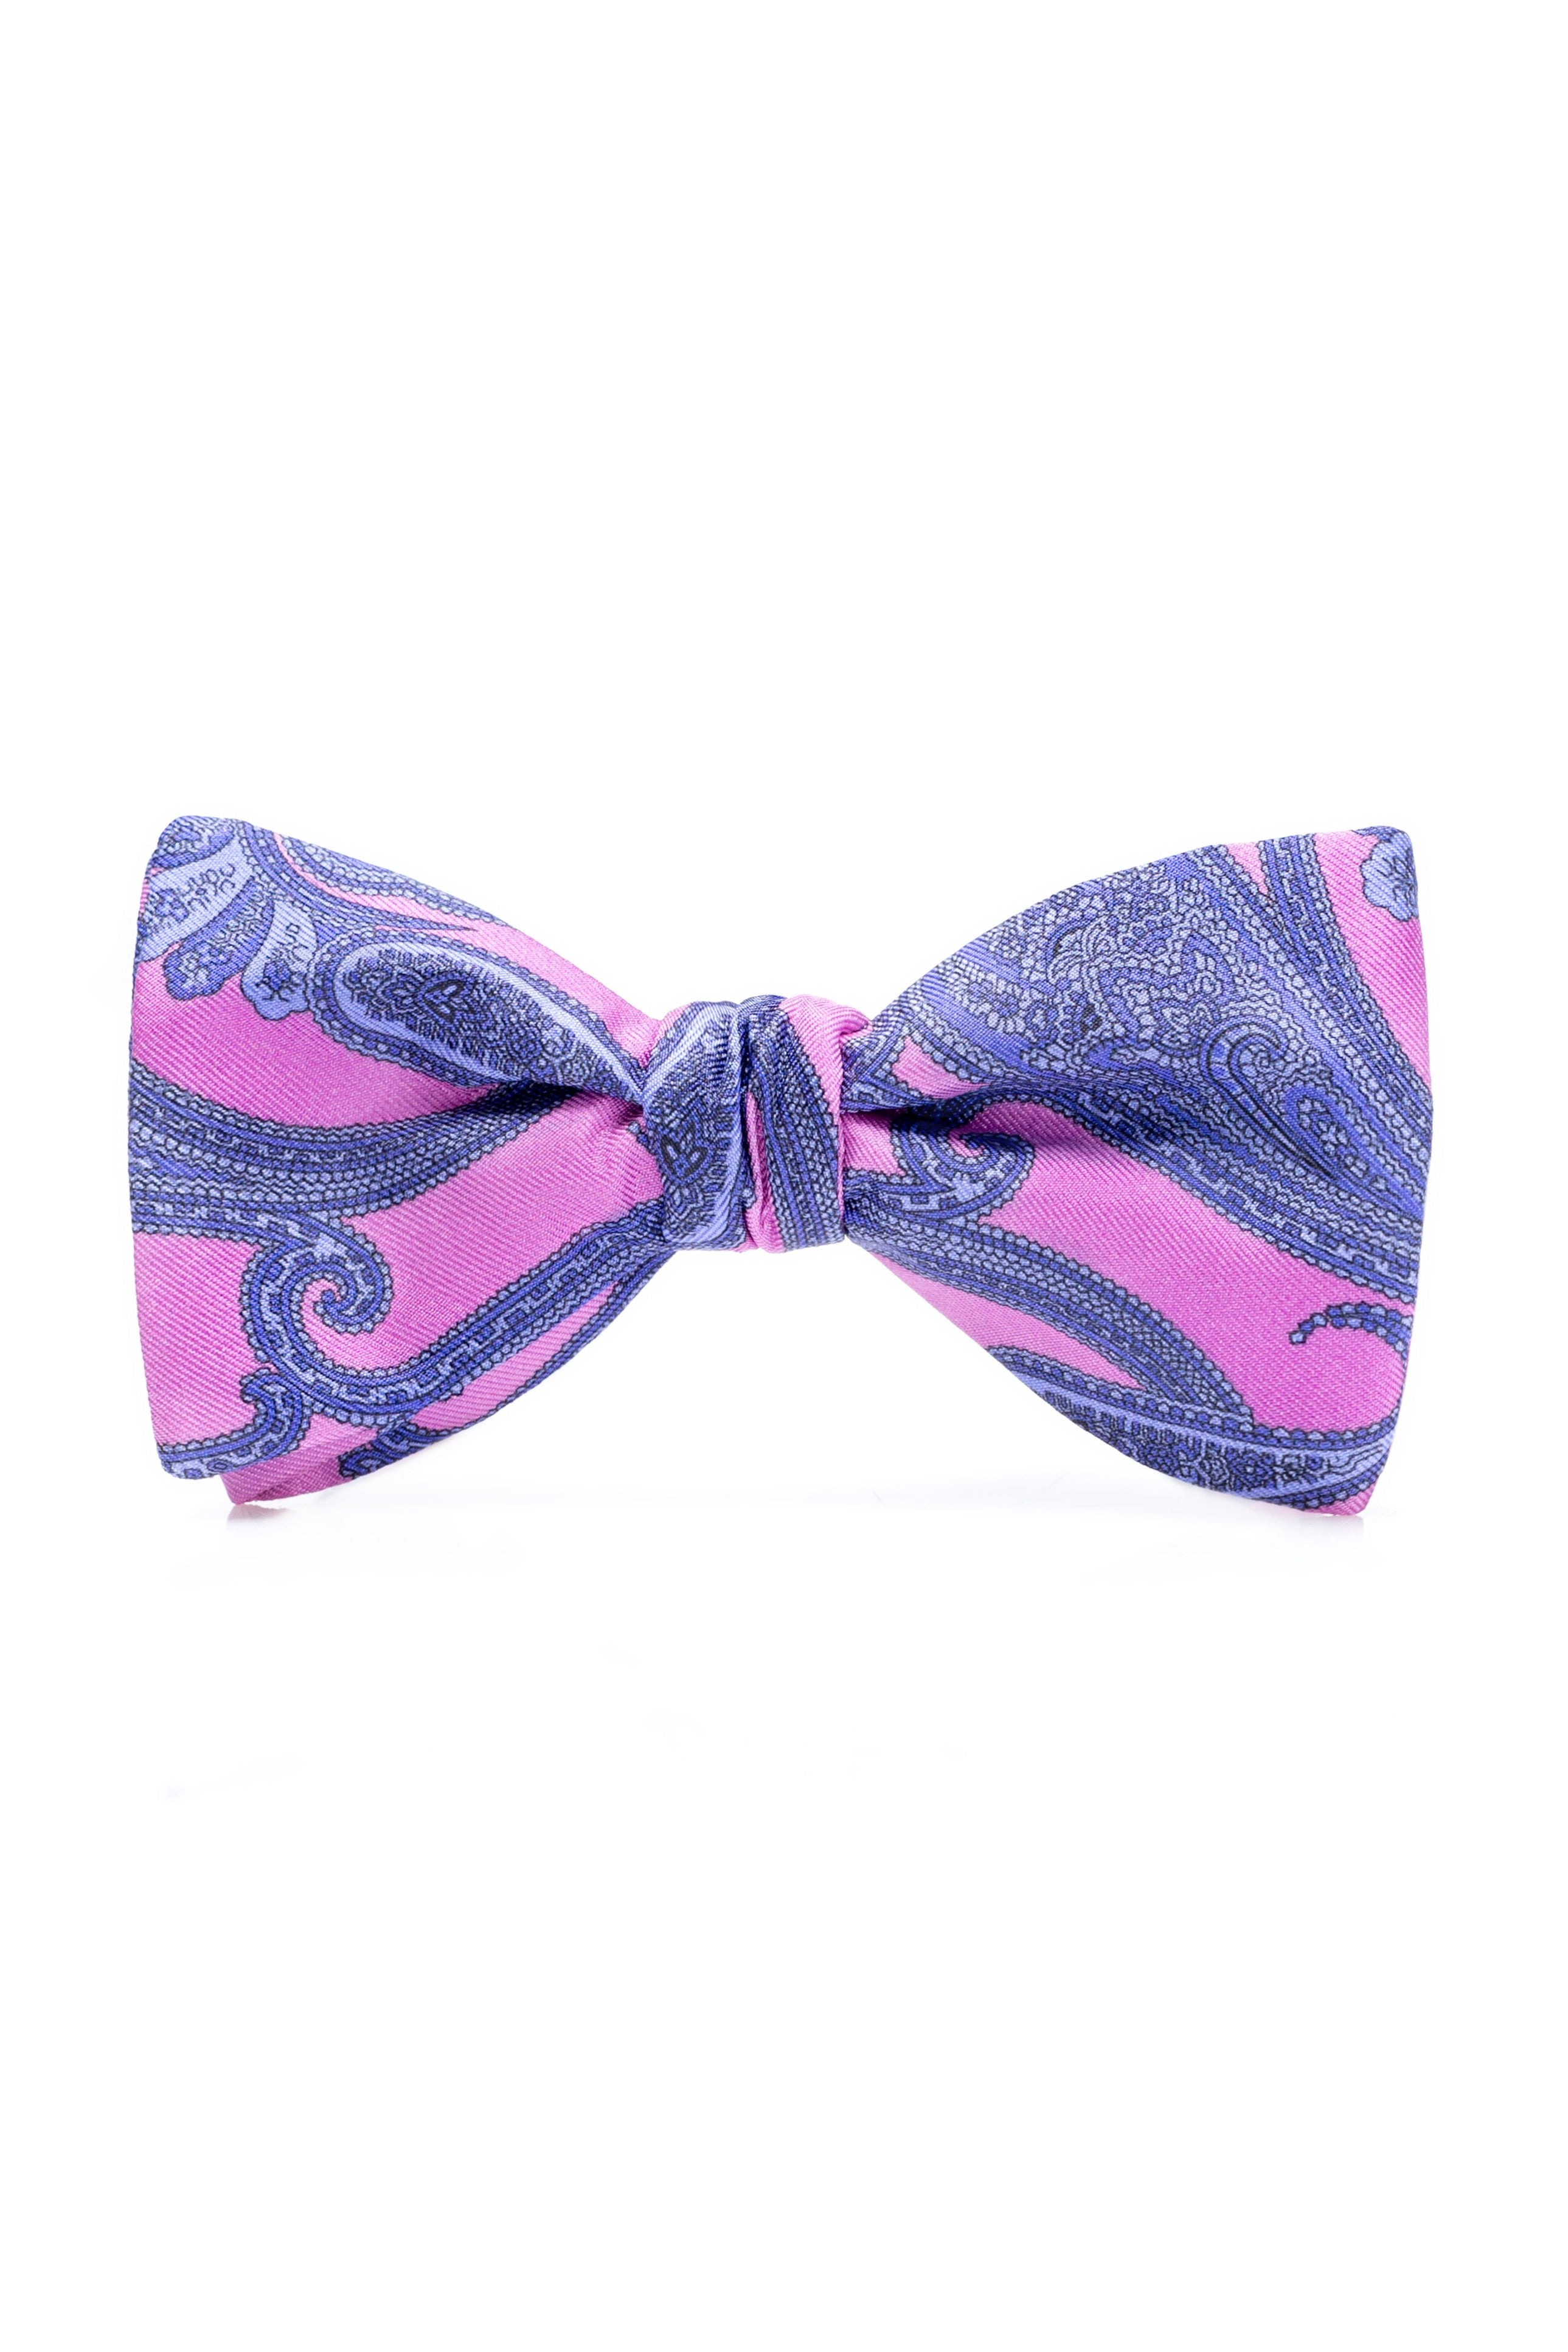 Orchid Purple Paisley Bow Tie